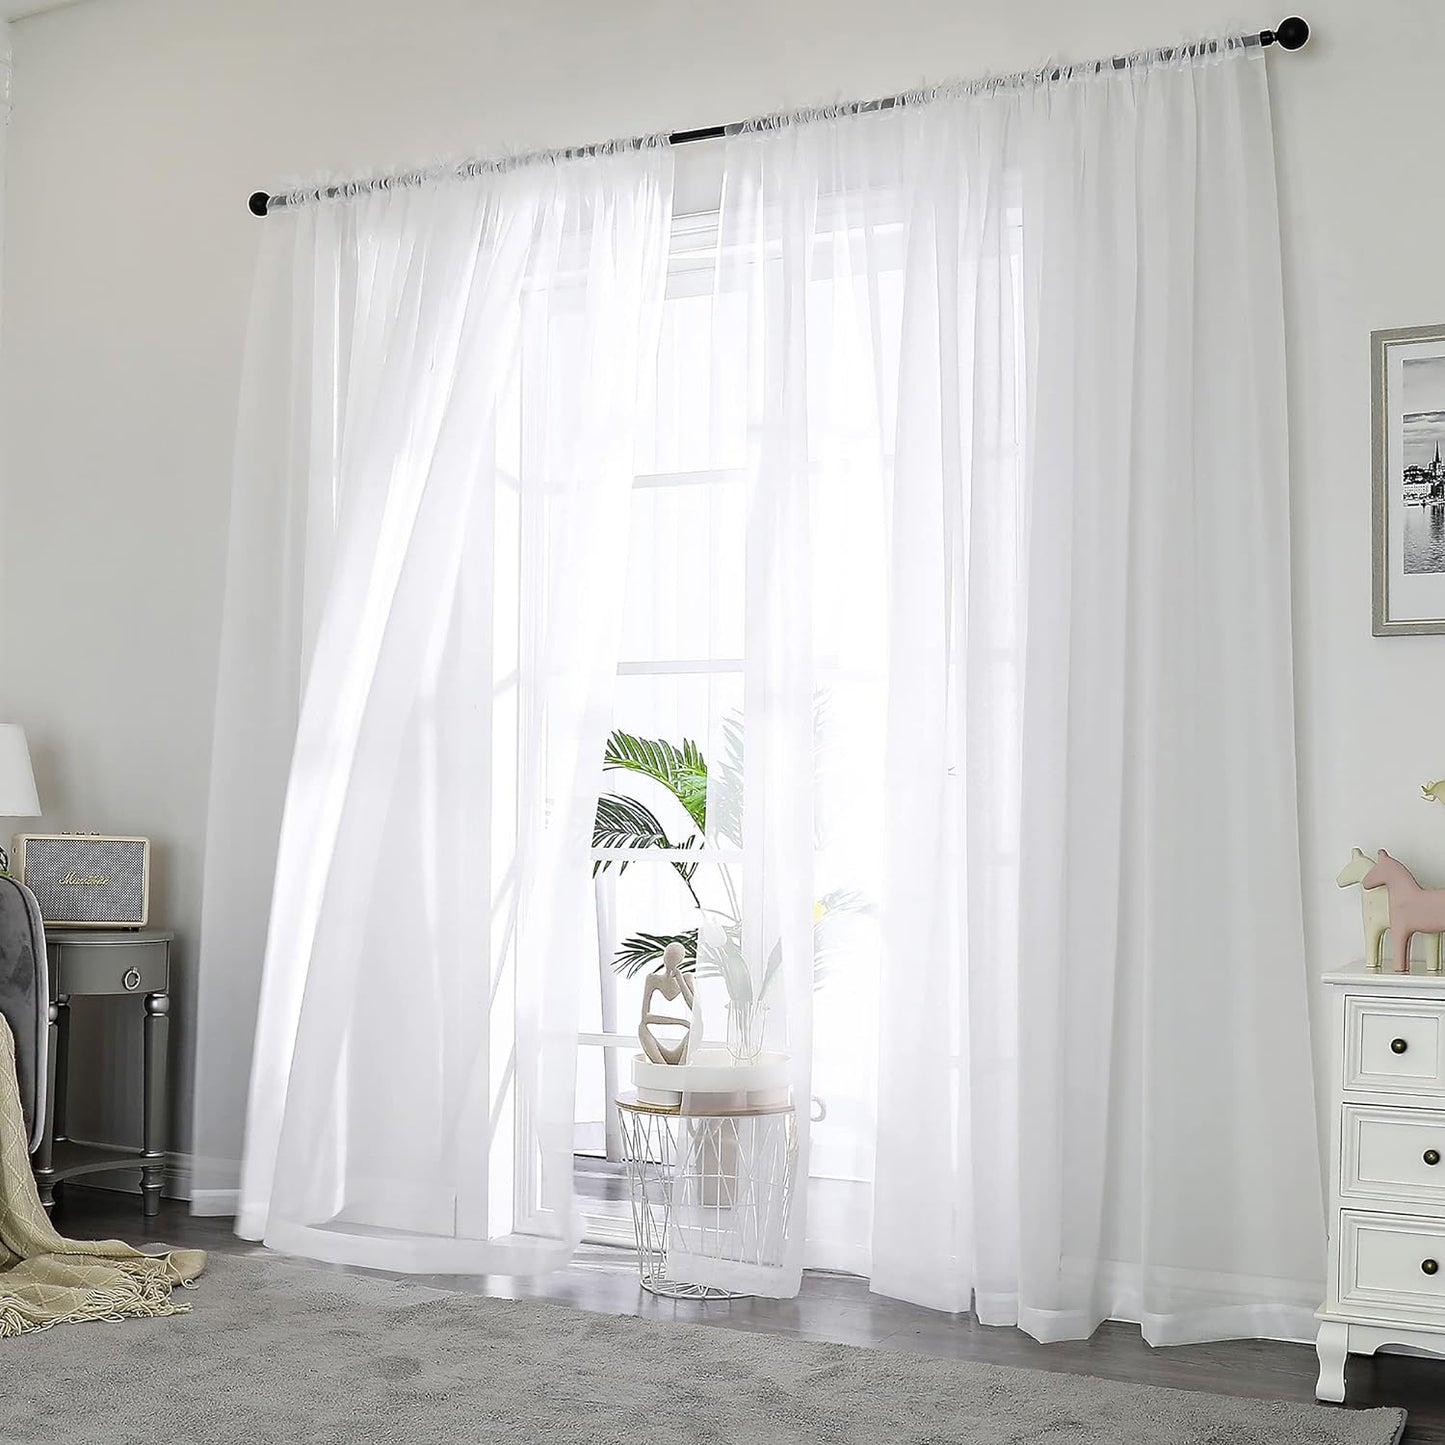 OVZME Sheer White Curtains 63 Inches Length Window Treatment for Kitchen, Elegant Airy Transparent Curtain Draperies Rod Pocket for Kids Living Room, 2 Pair 4 Panels, Each 42 Width 63 Length  OVZME White 42W X 84L 